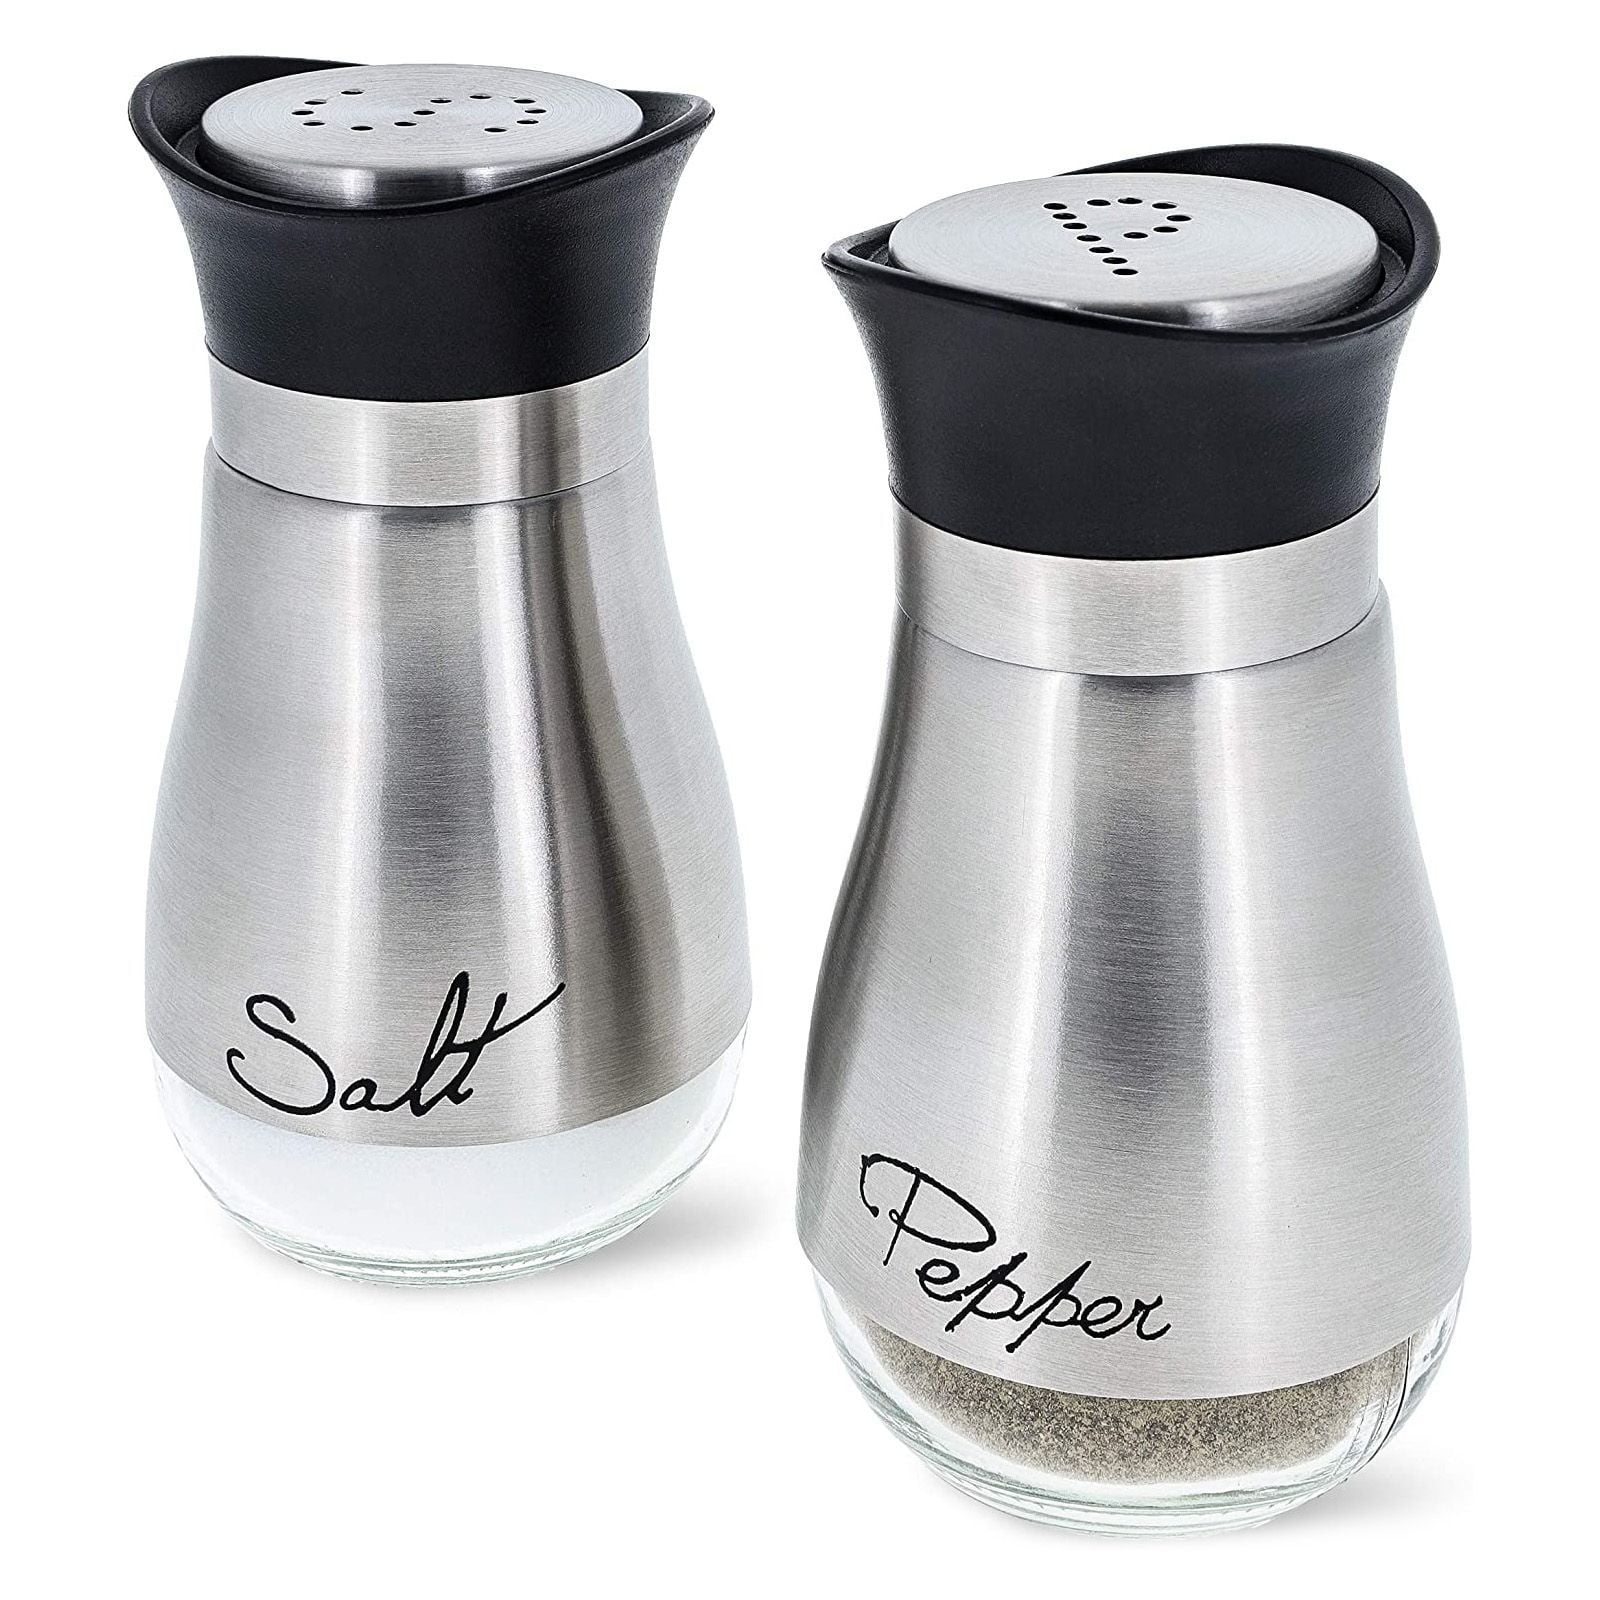 SALT AND PEPPER SHAKER SET BLACK RED AND SILVER 